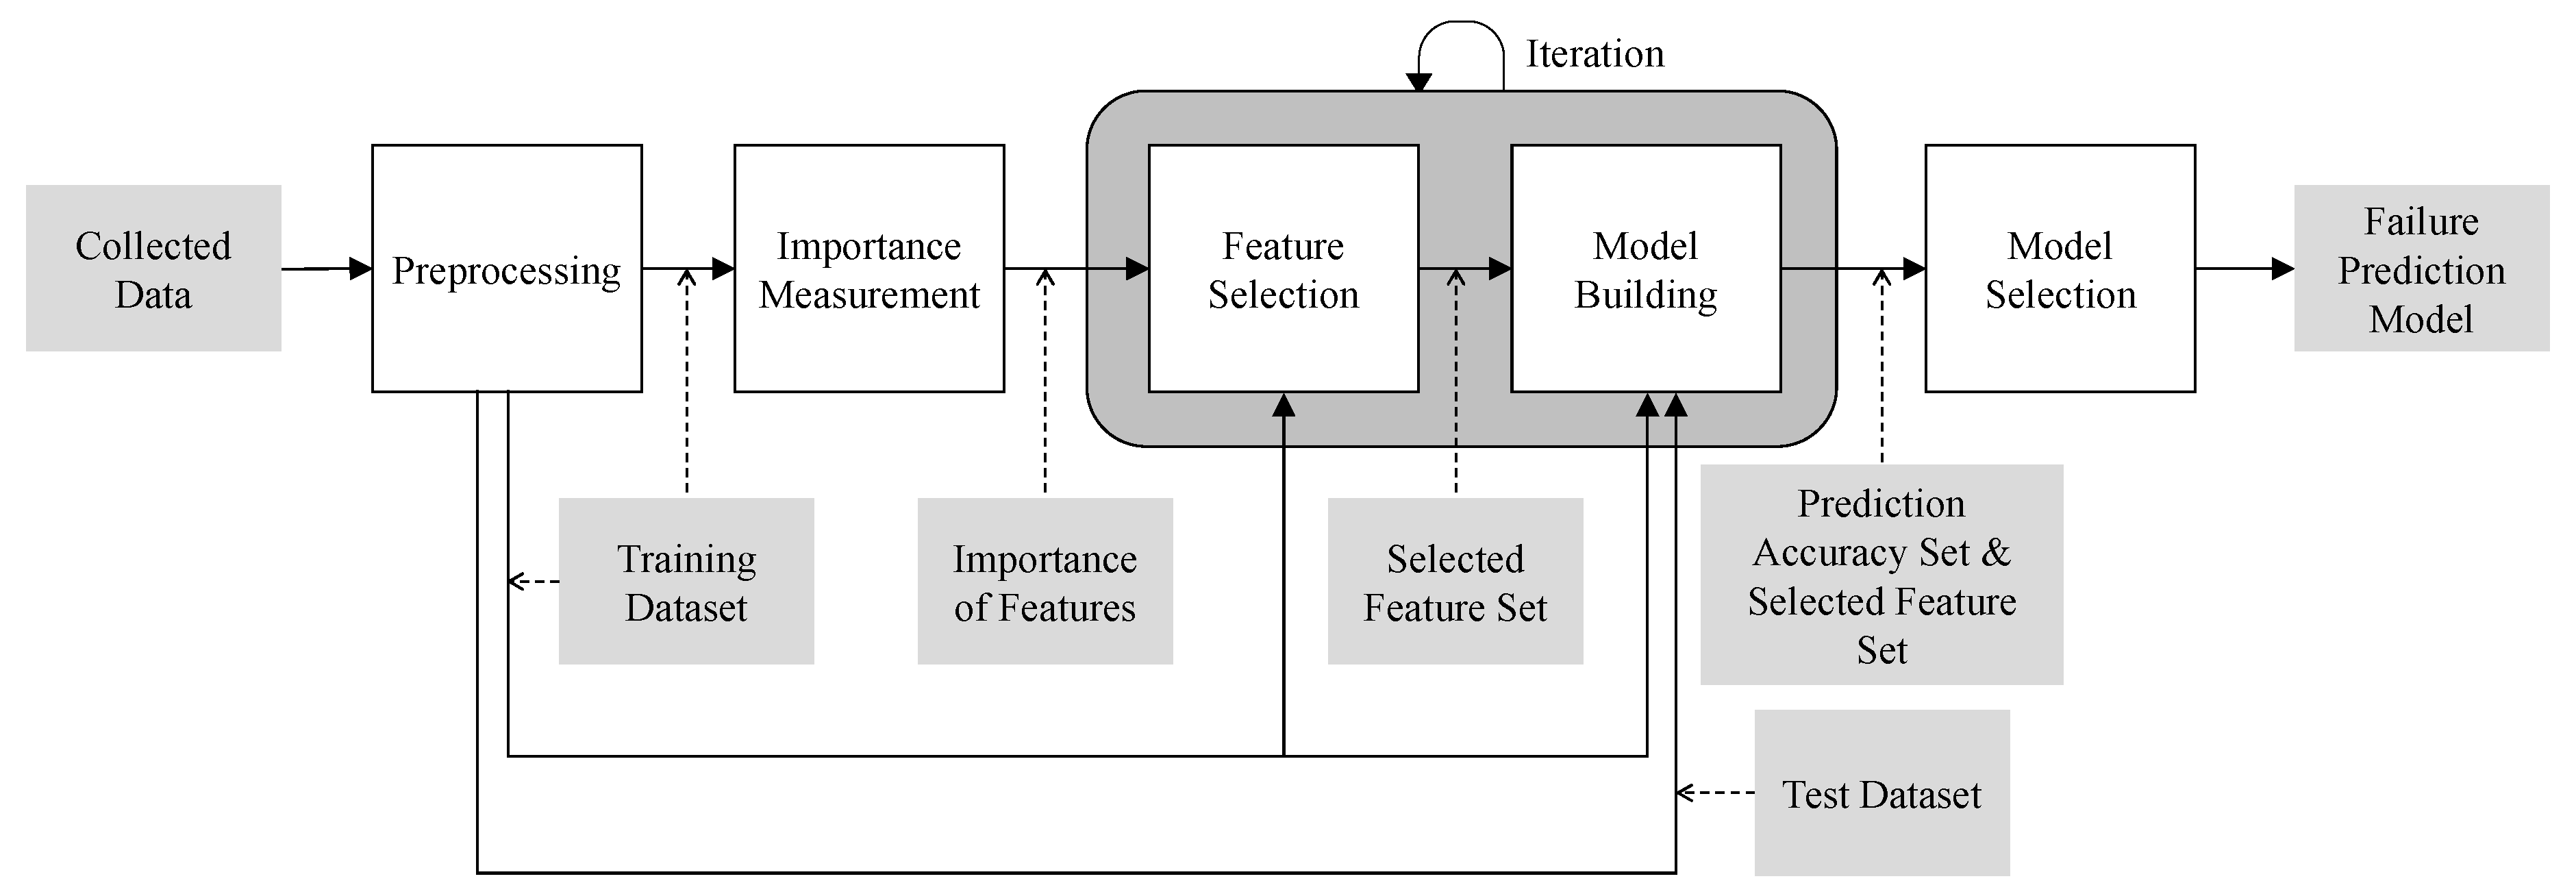 Symmetry | Free Full-Text | Failure Prediction Model Using Iterative  Feature Selection for Industrial Internet of Things